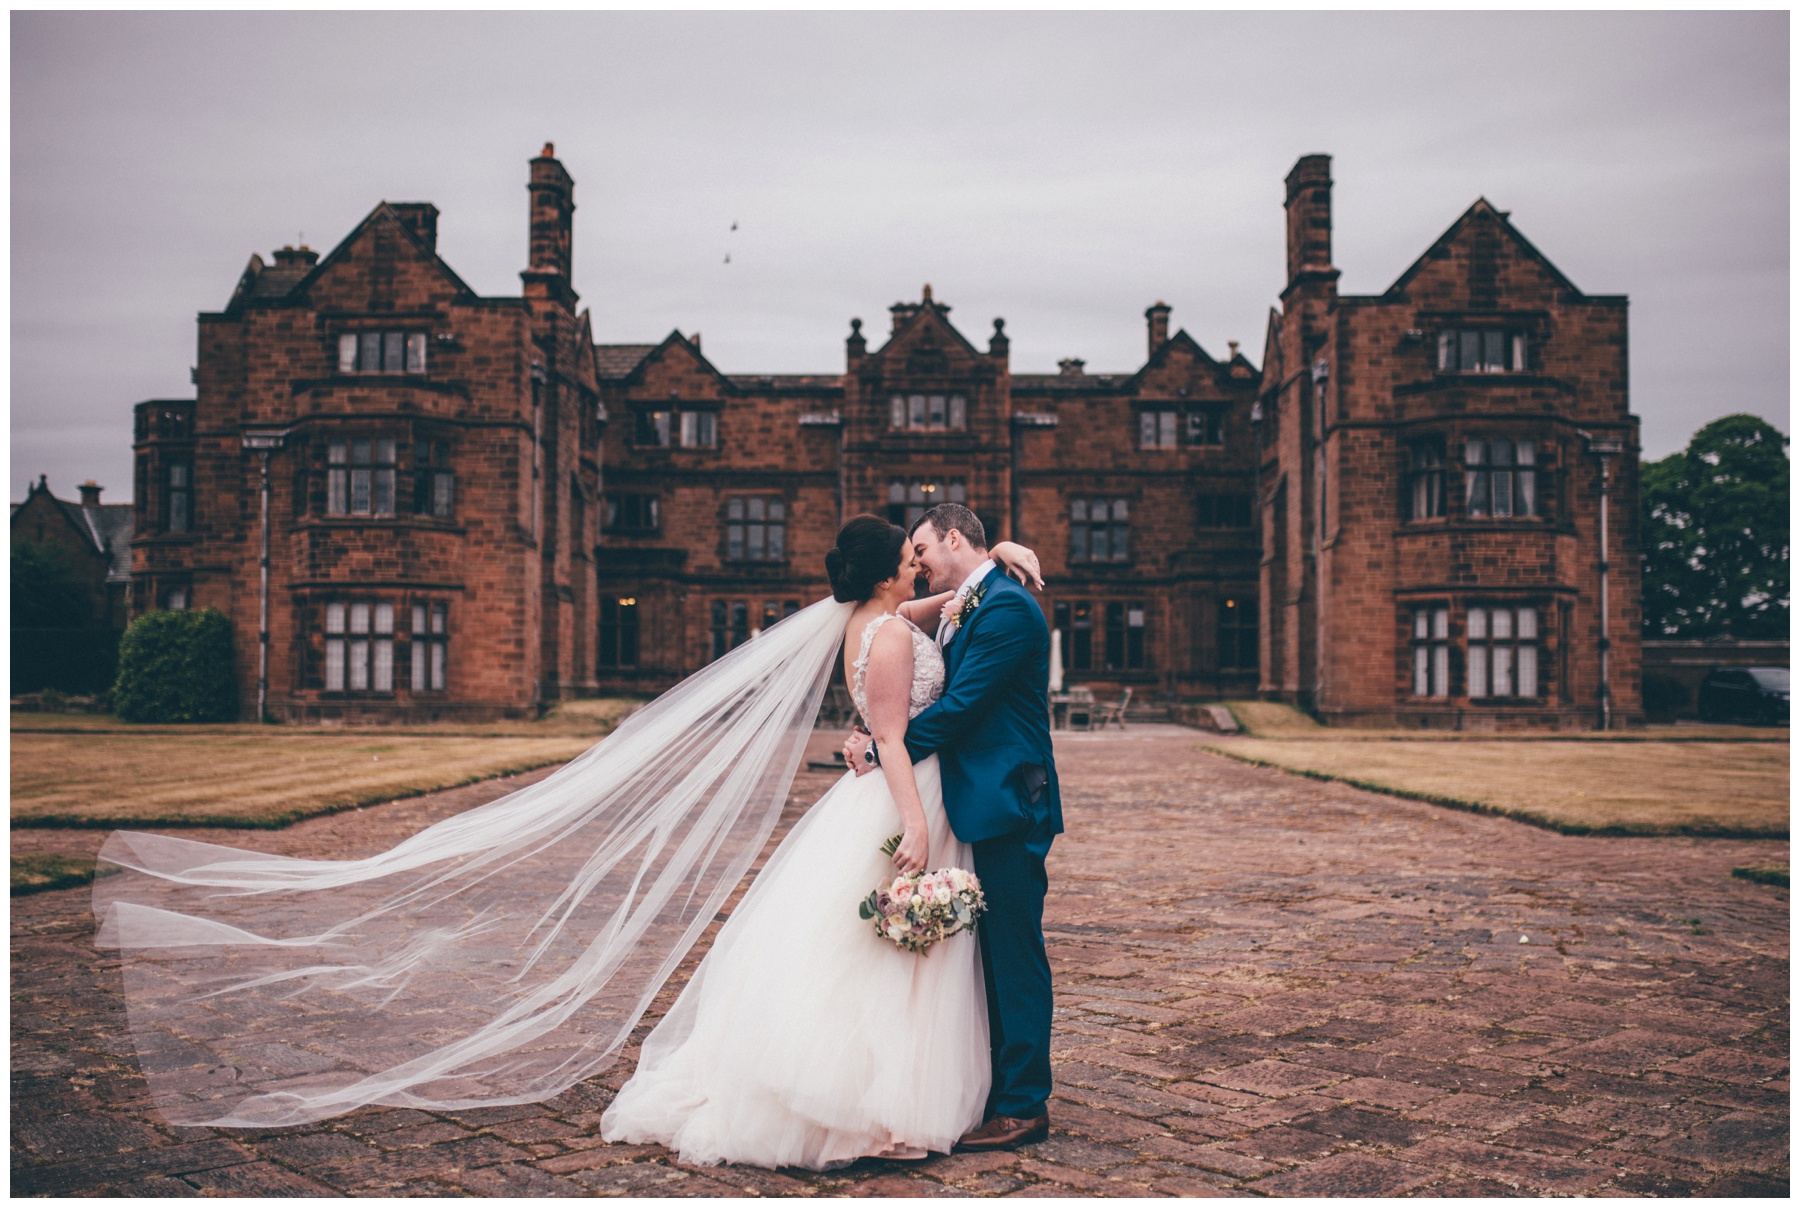 Stunning veil blowing in the wind at summer wedding at Thornton Manor in Cheshire.